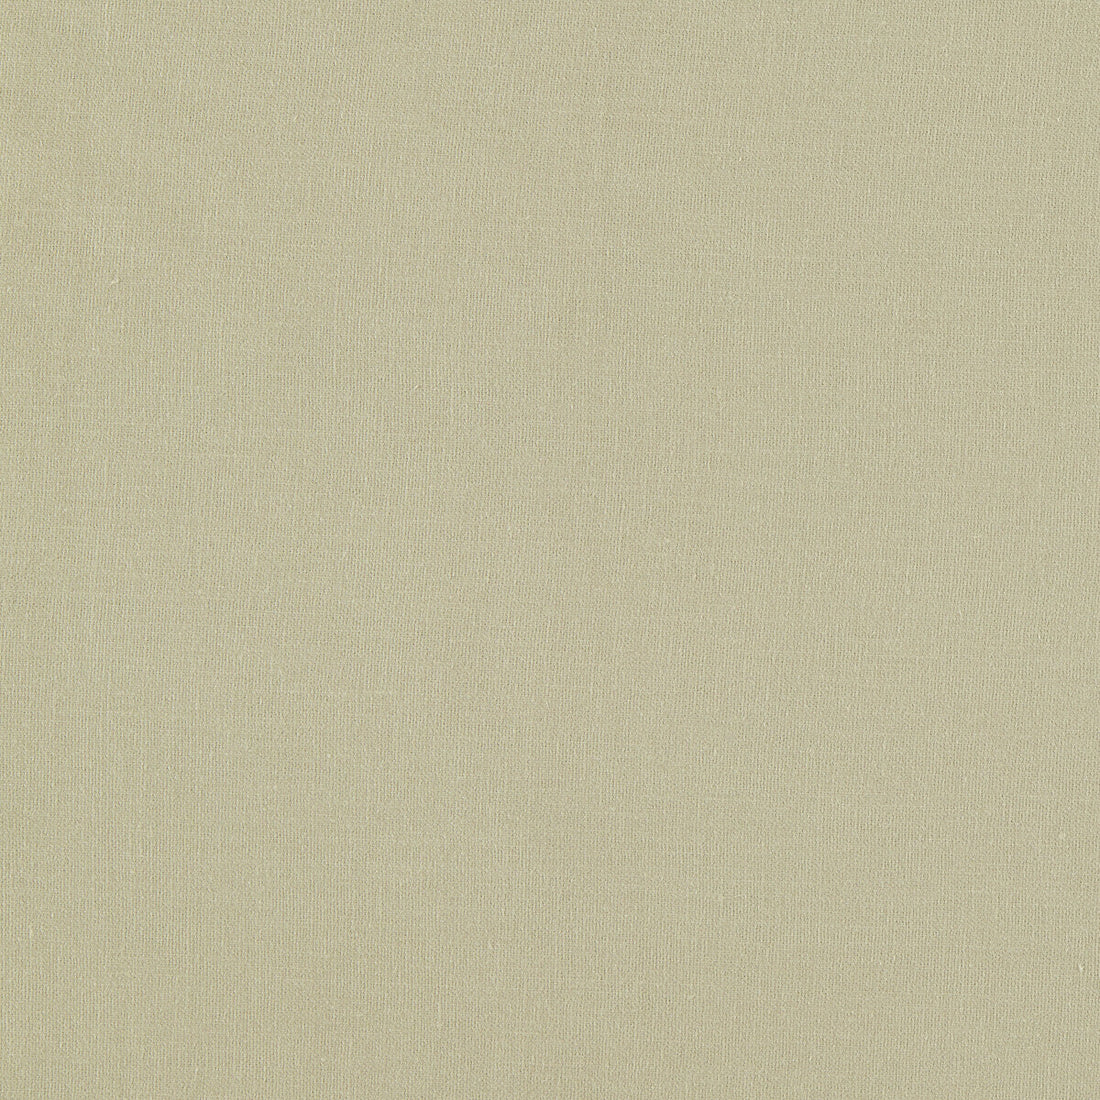 Lazio fabric in putty color - pattern F1537/25.CAC.0 - by Clarke And Clarke in the Clarke &amp; Clarke Lazio collection